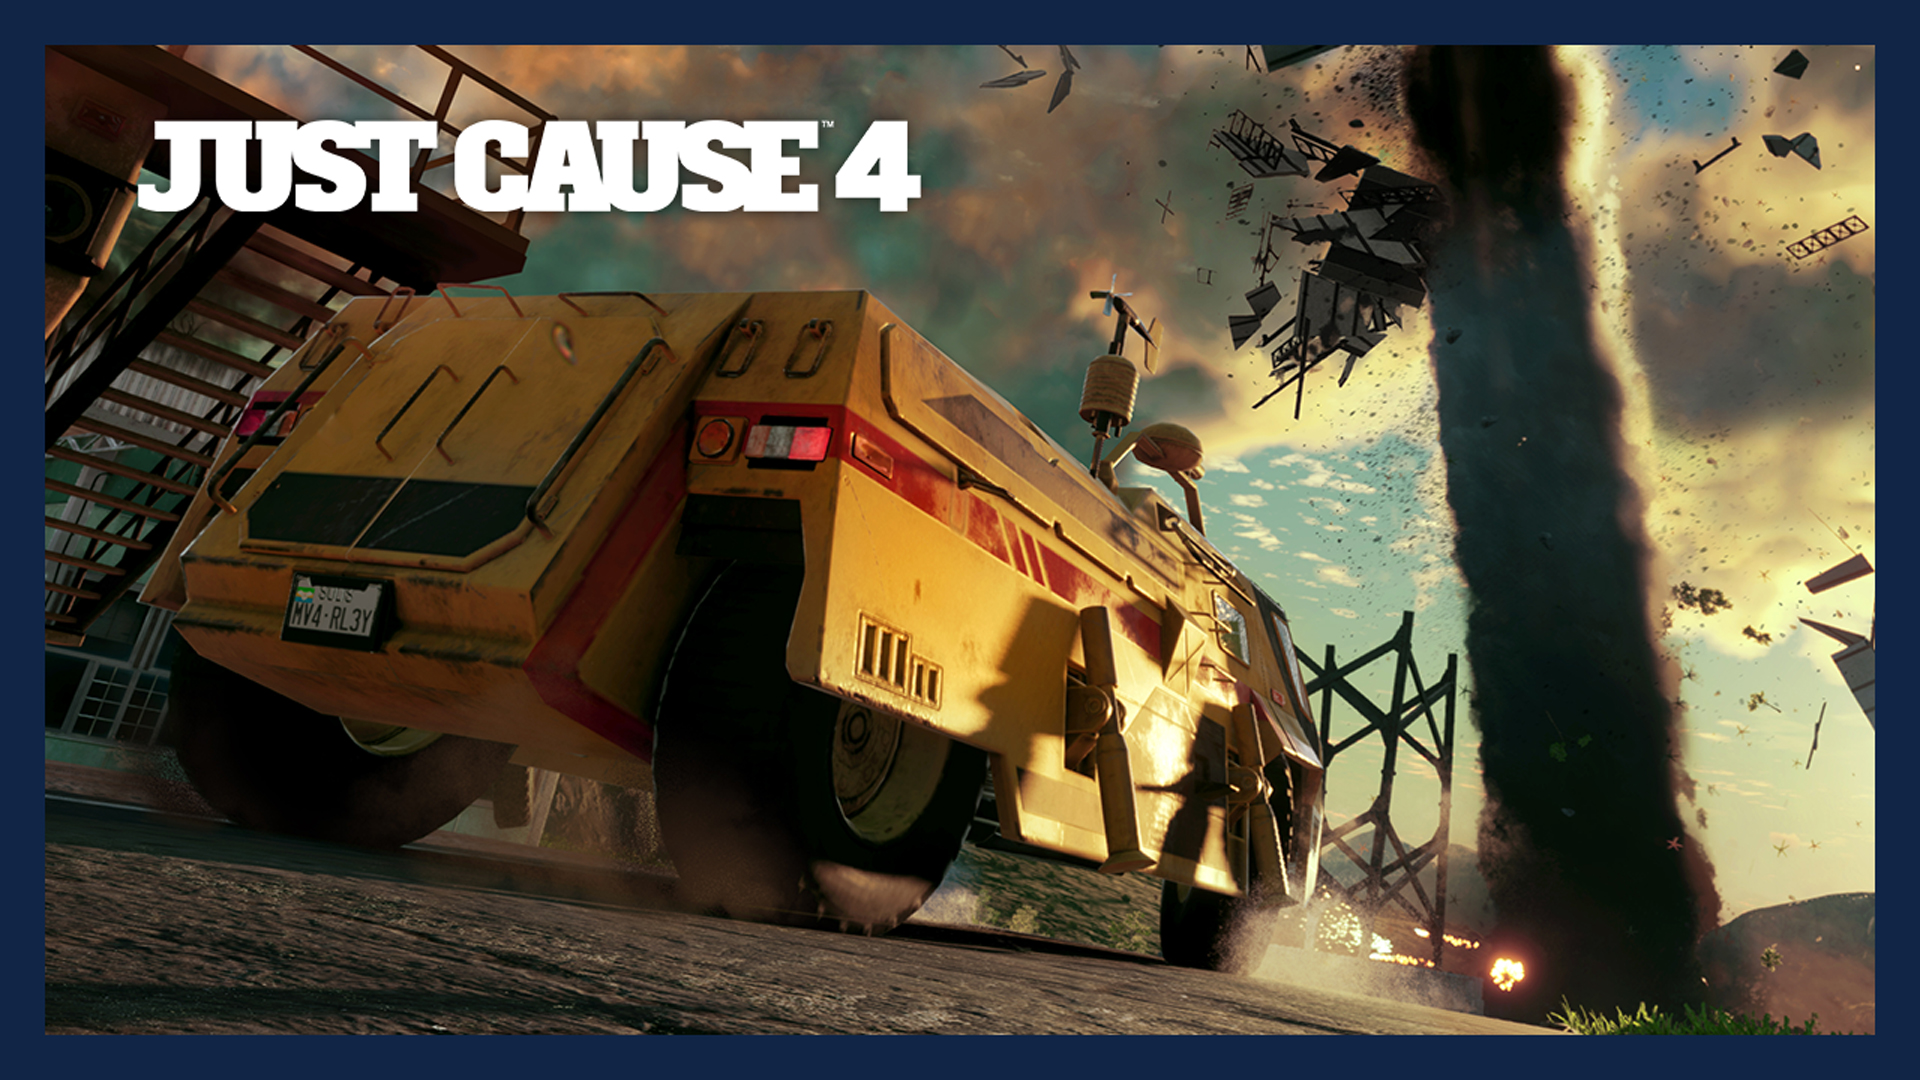 xbox store just cause 4